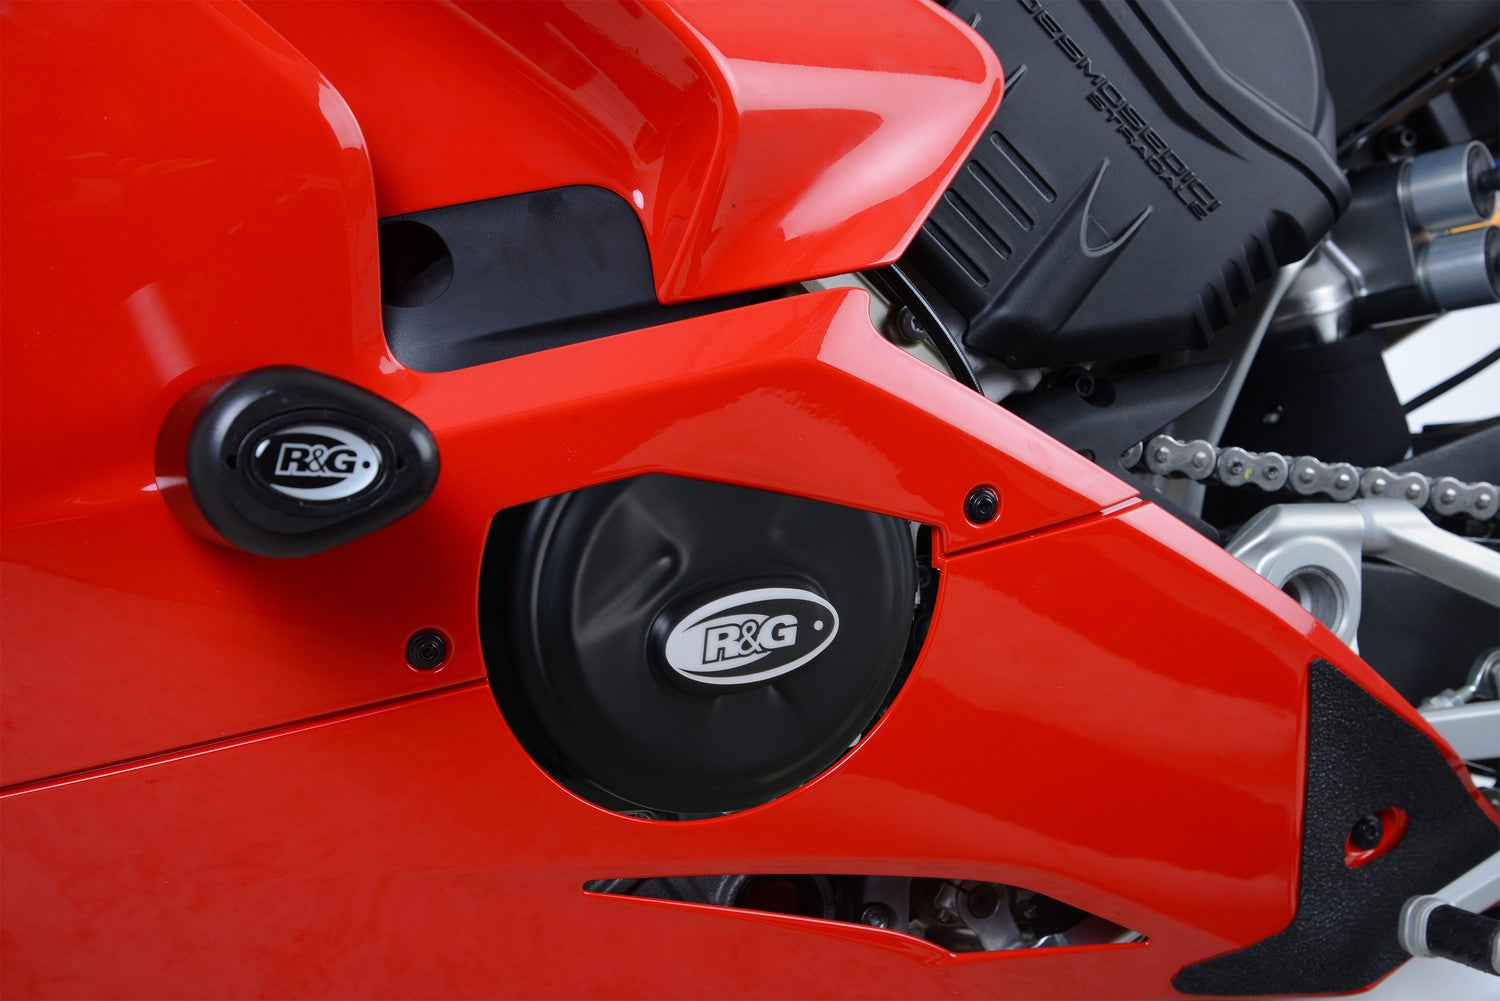 R&G Left Engine Case Cover for Ducati Panigale V4